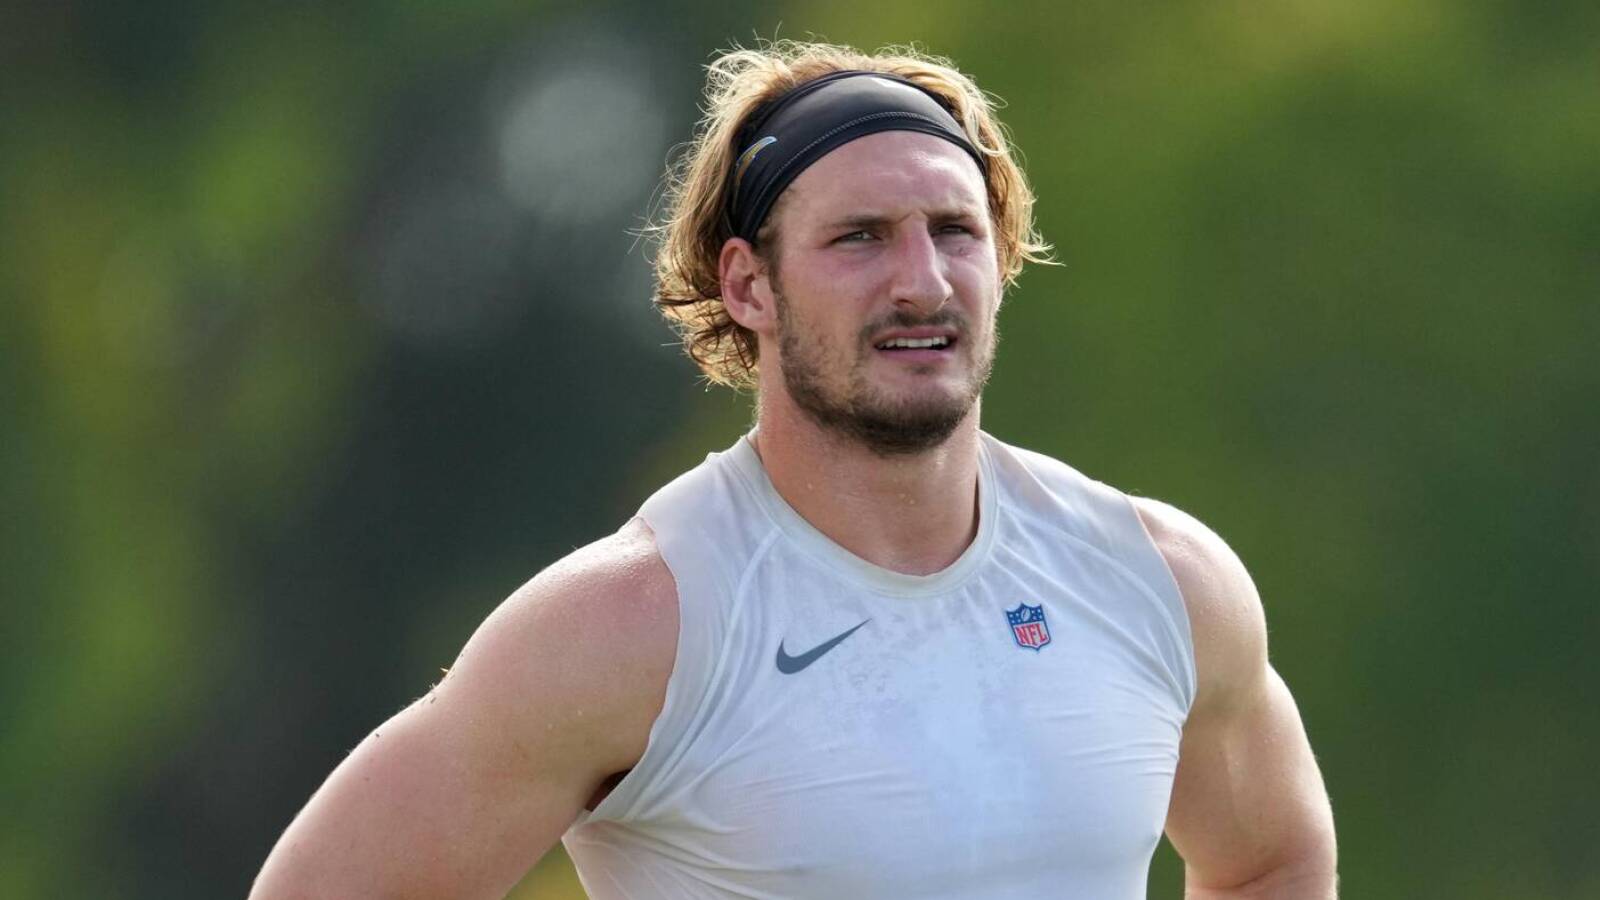 Joey Bosa’s return comes at the perfect time for Chargers